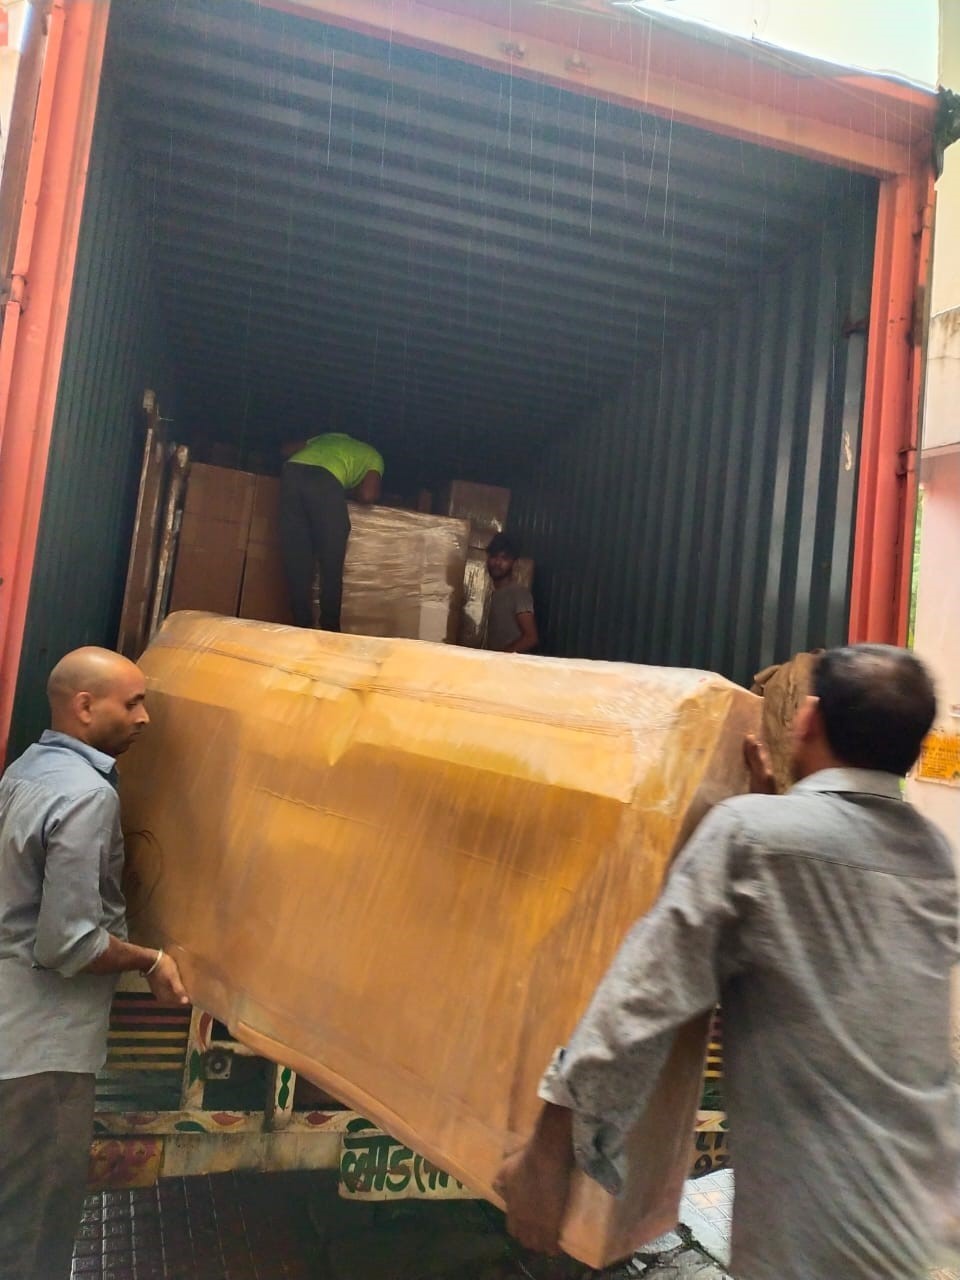 Rehousing packers and movers from Hyderabad transportation services image in Pune office